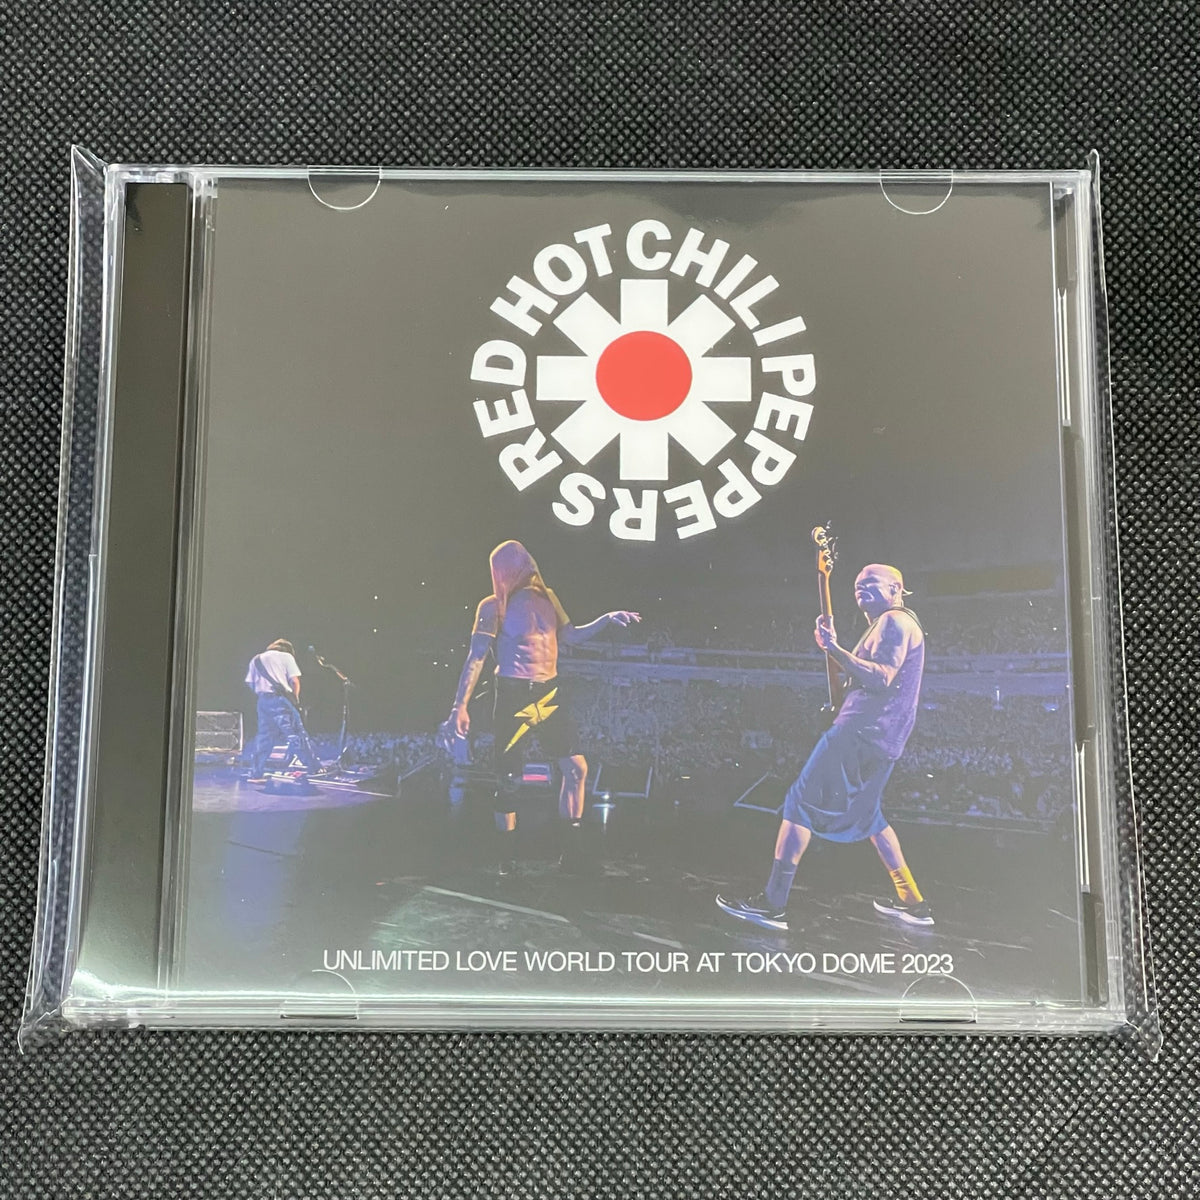 RED HOT CHILI PEPPERS - UNLIMITED LOVE WORLD TOUR AT TOKYO DOME 